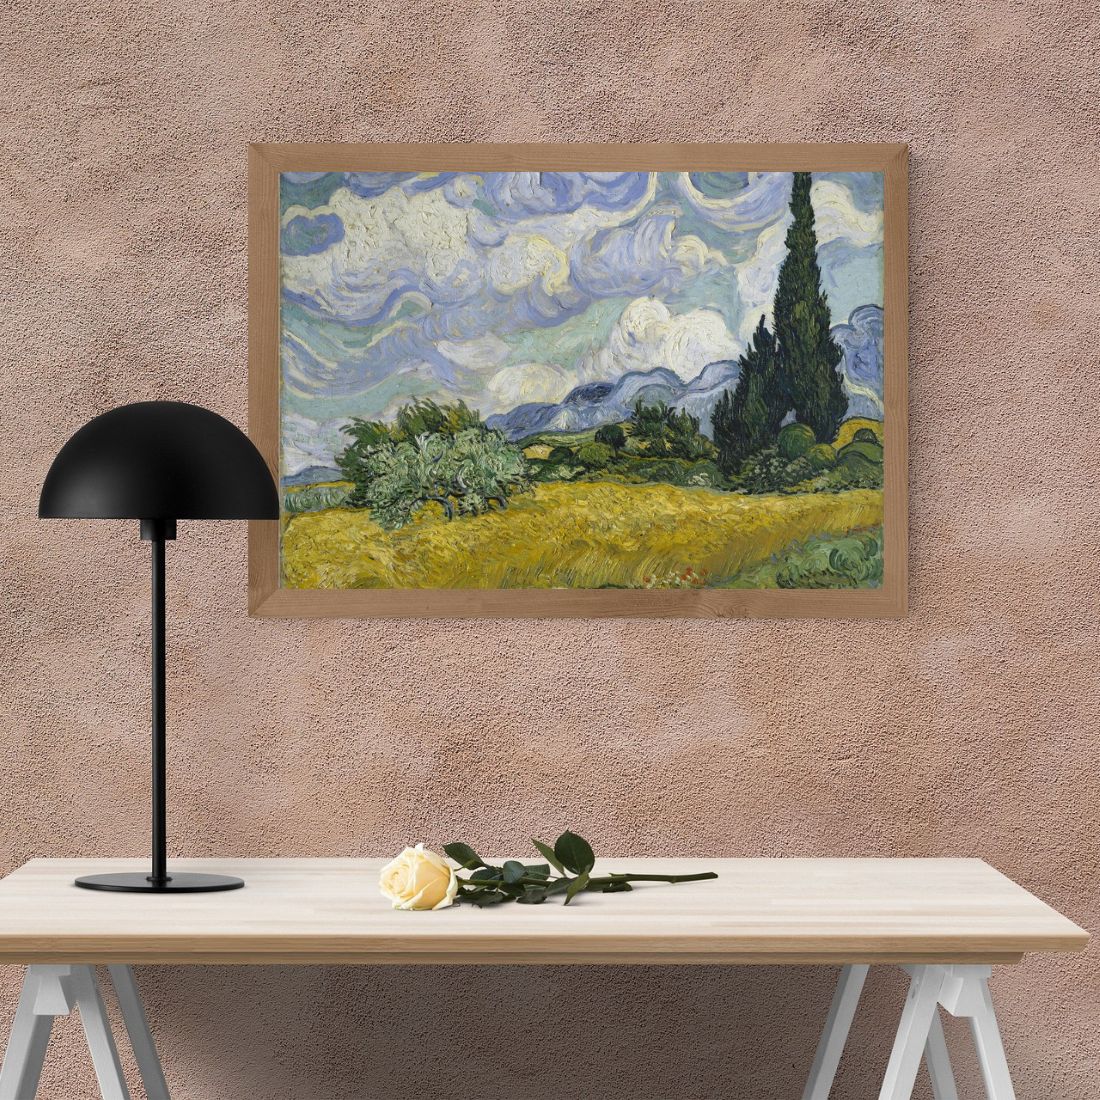 Landscape Wall Art cover image.